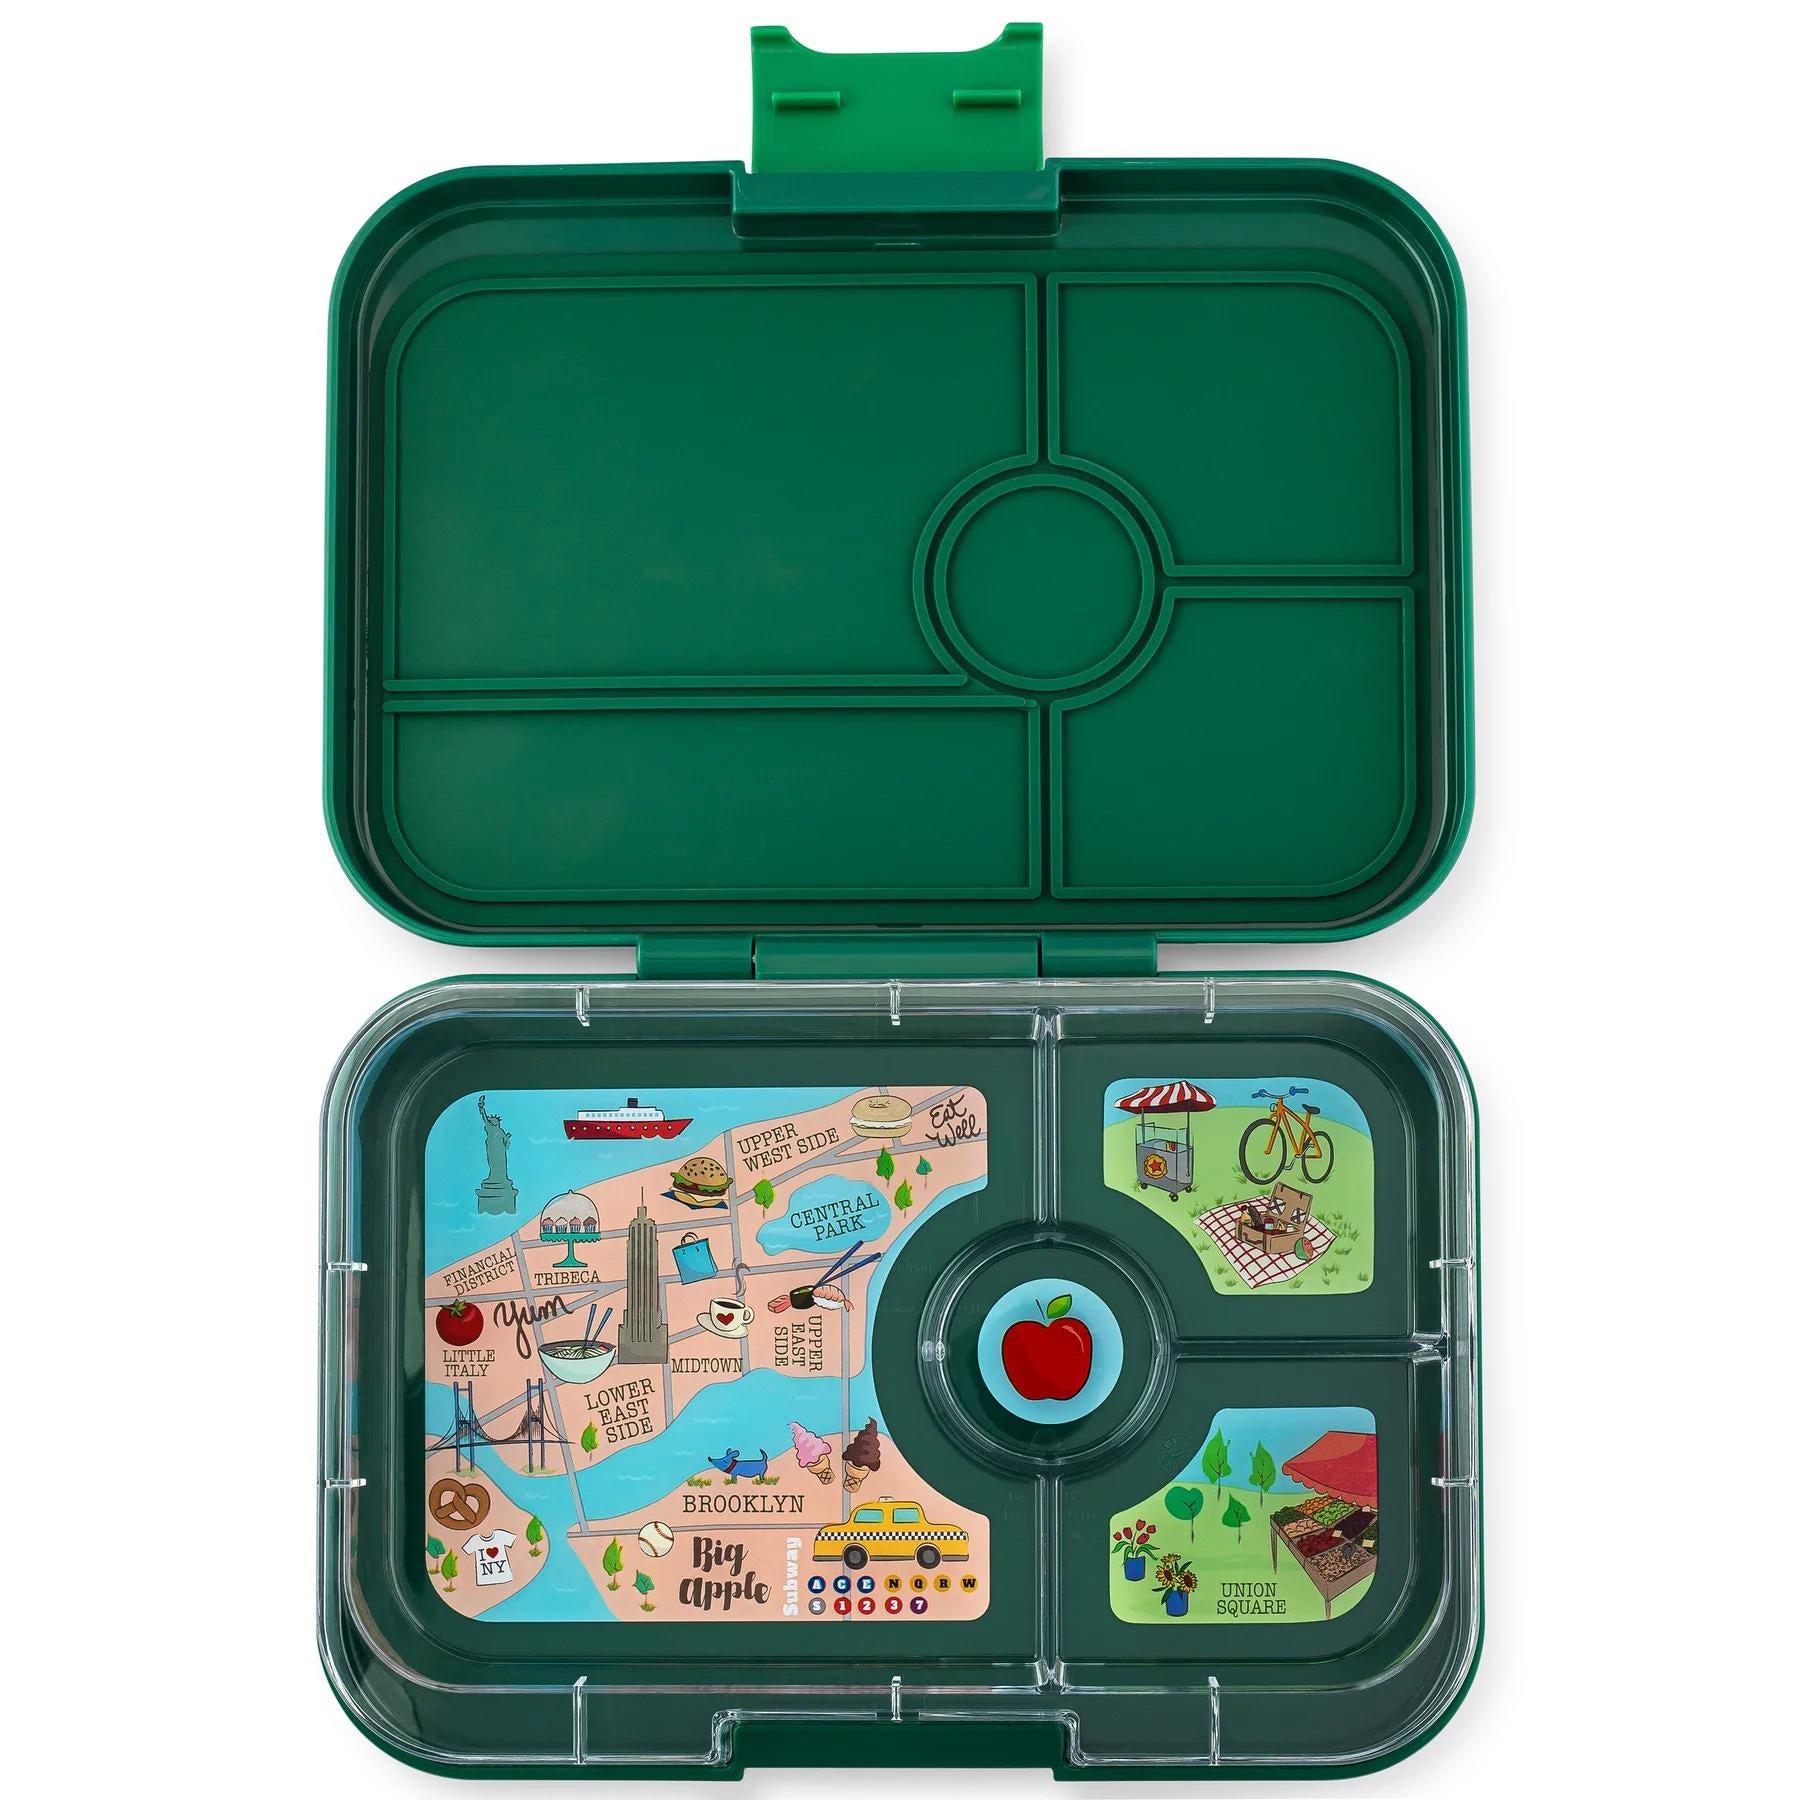 Yumbox Tapas 4 Compartment Lunch Box